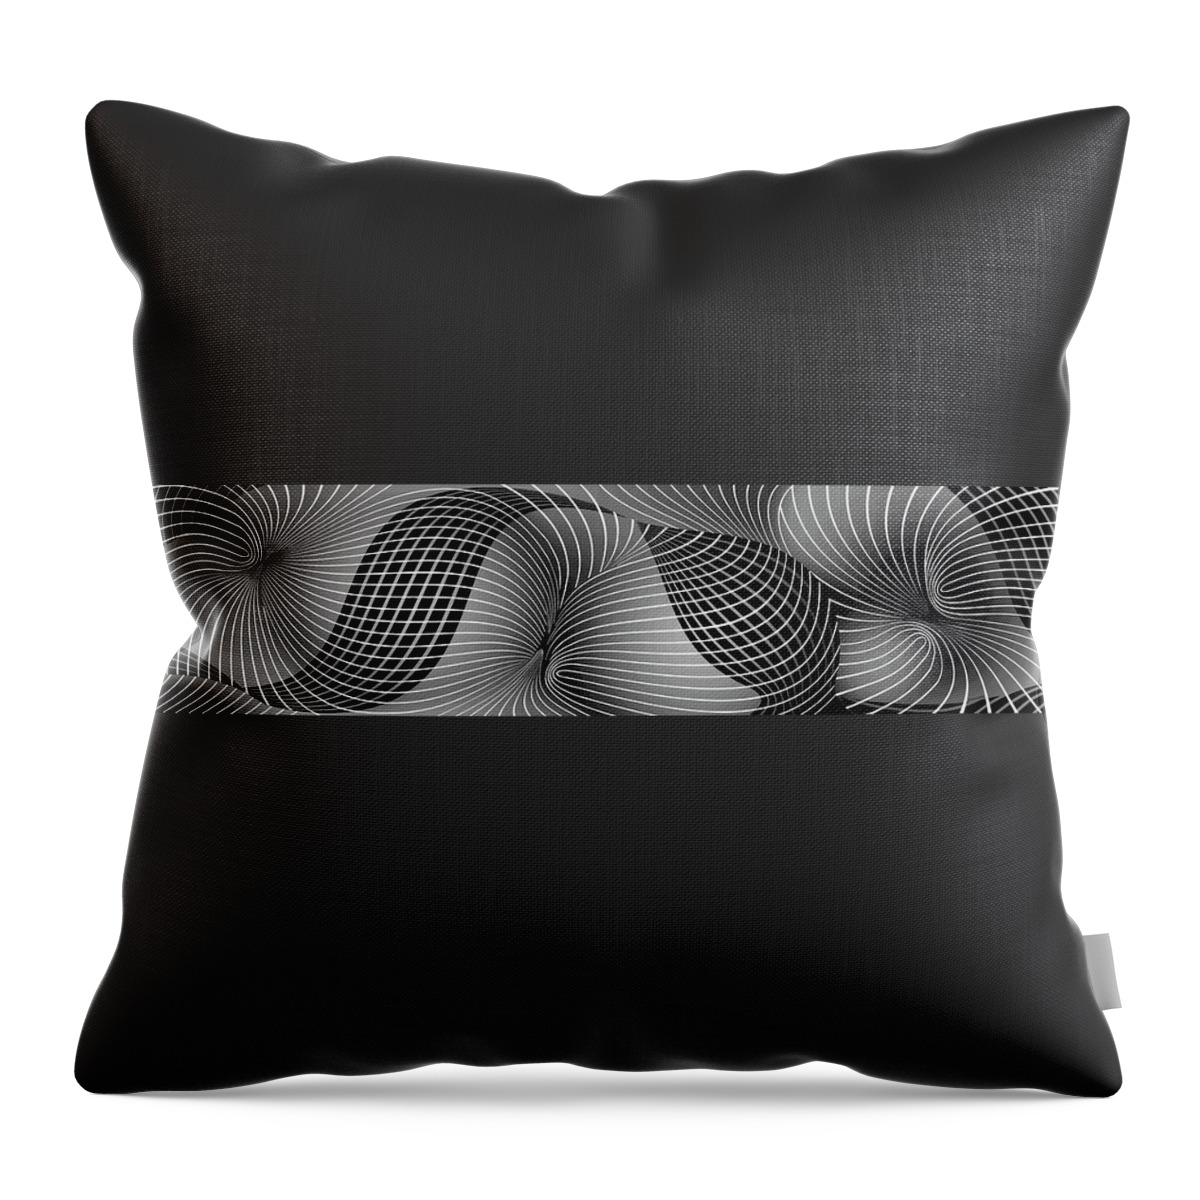 Space-time Throw Pillow featuring the painting Space-time No-1, Black and White by David Arrigoni